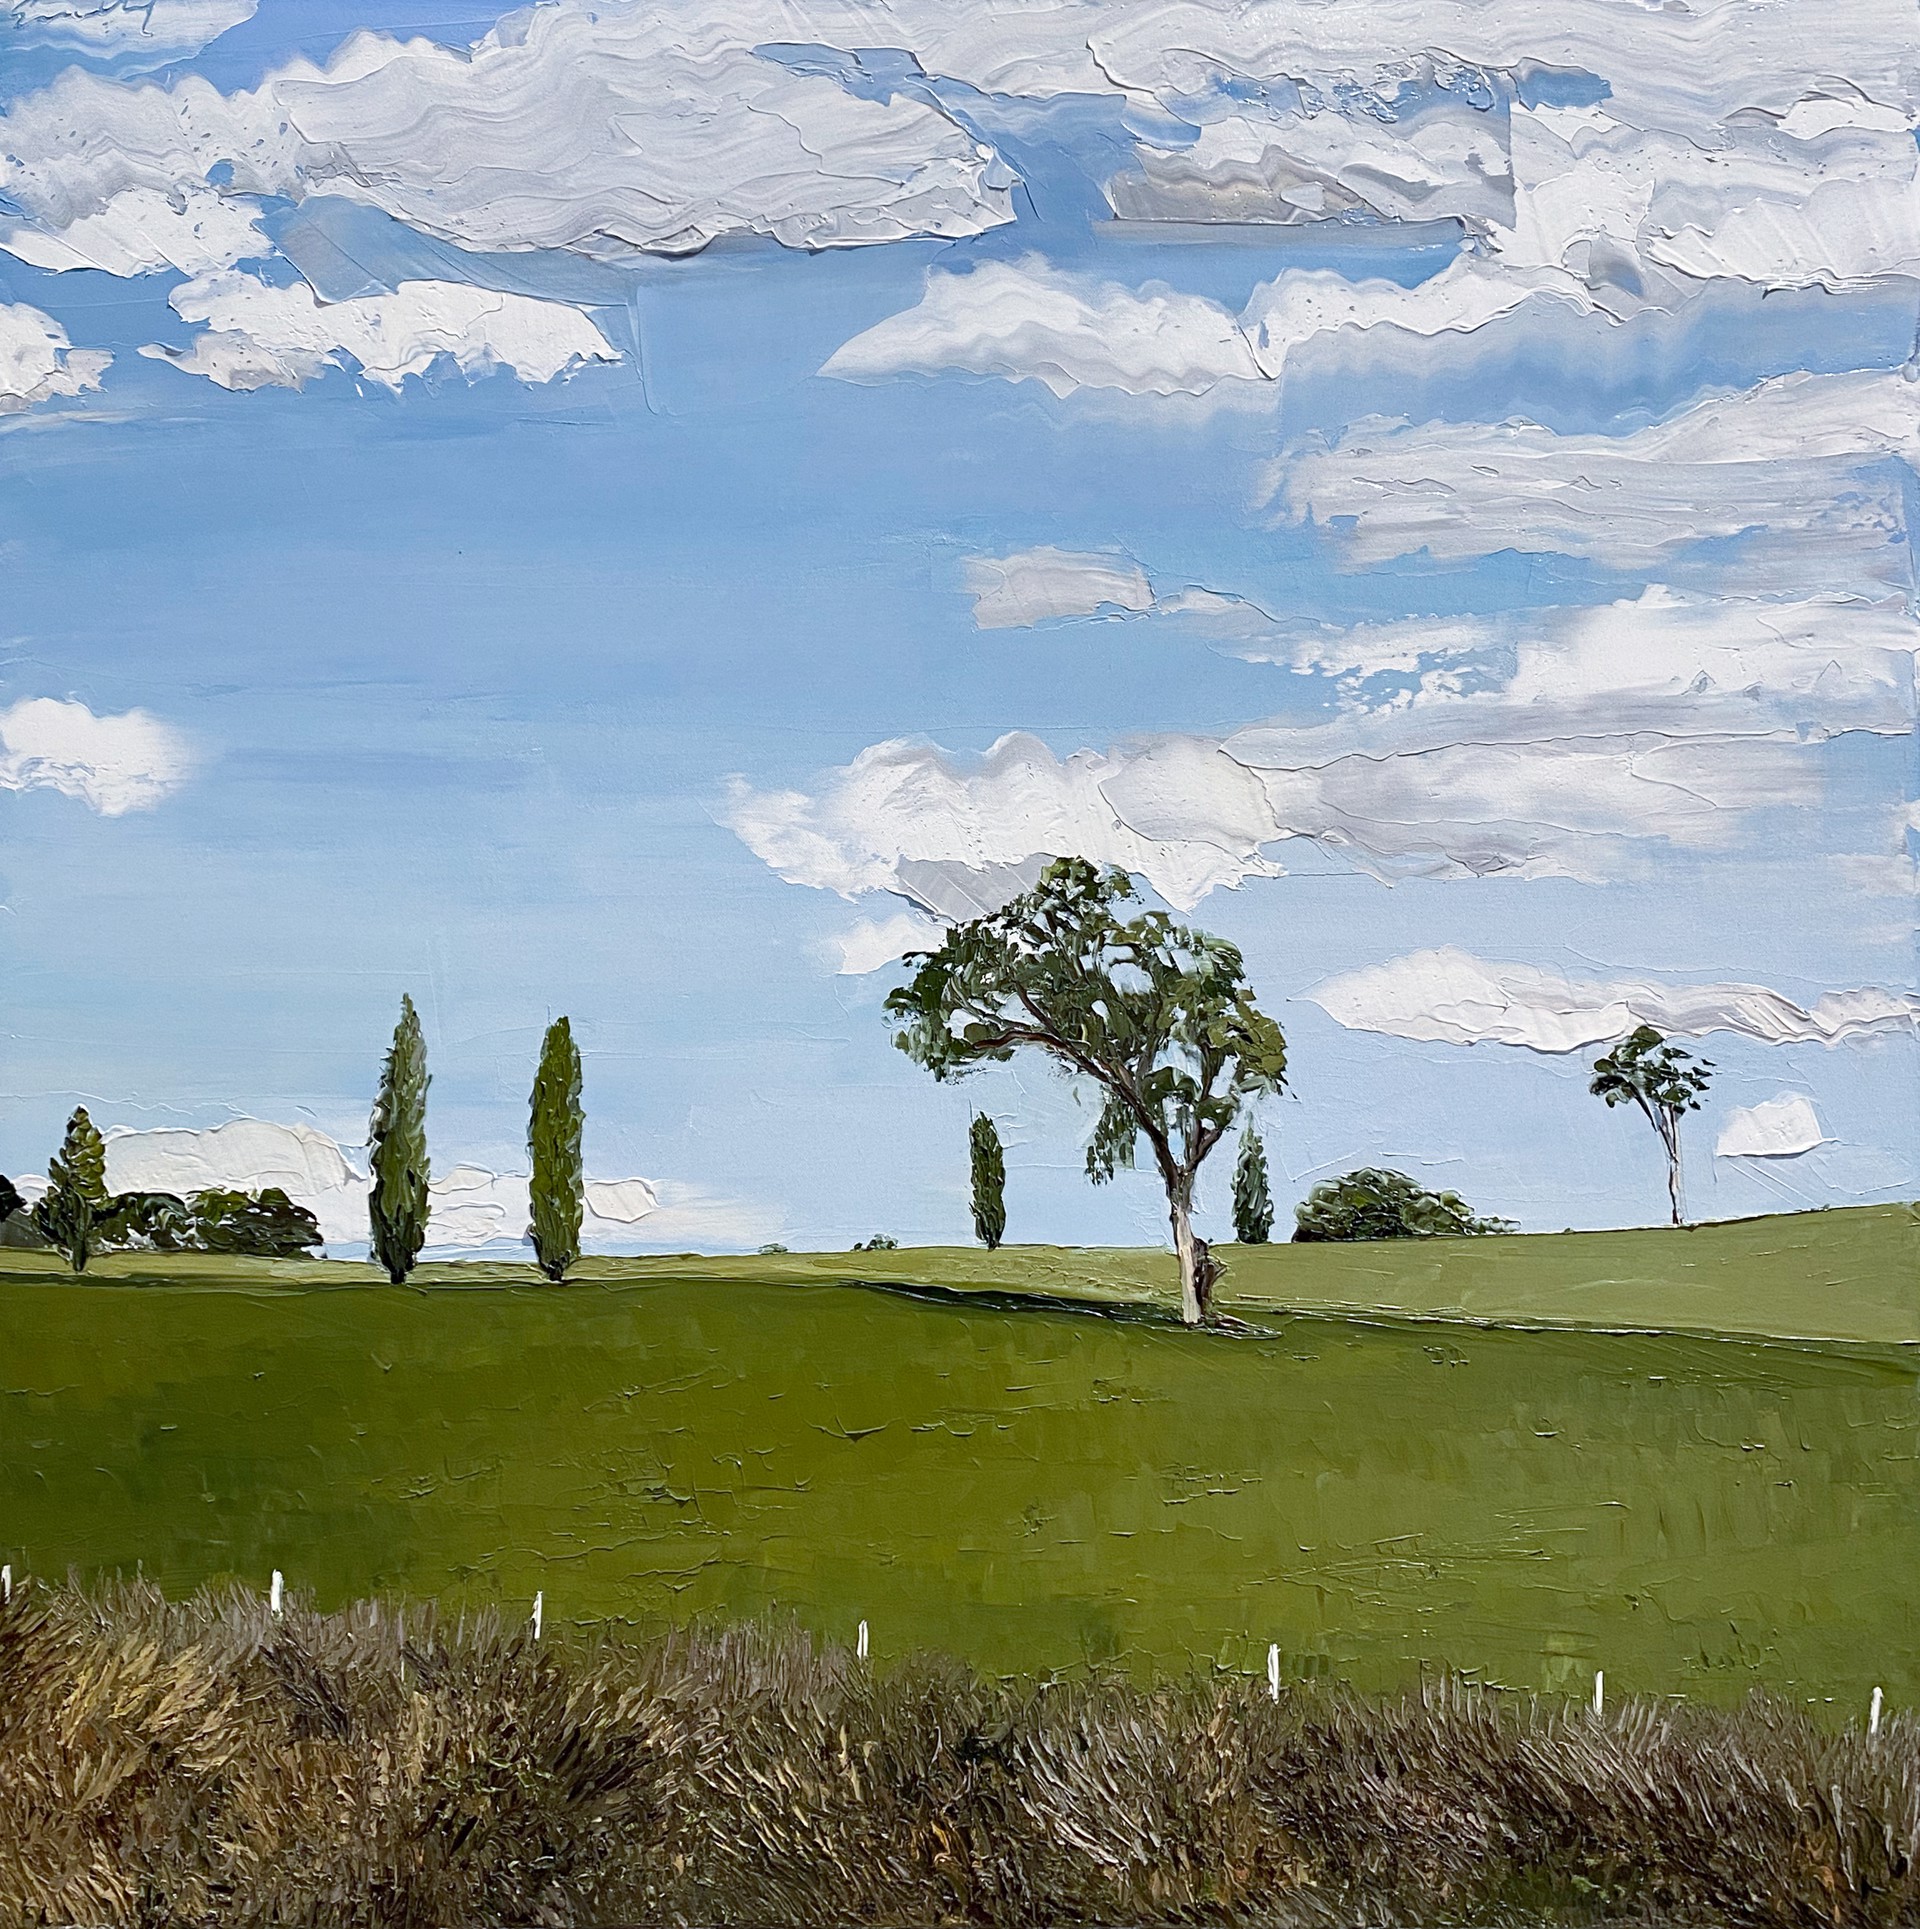 Trees and Clouds (Hume Highway, Murrimba) by Emily Persson